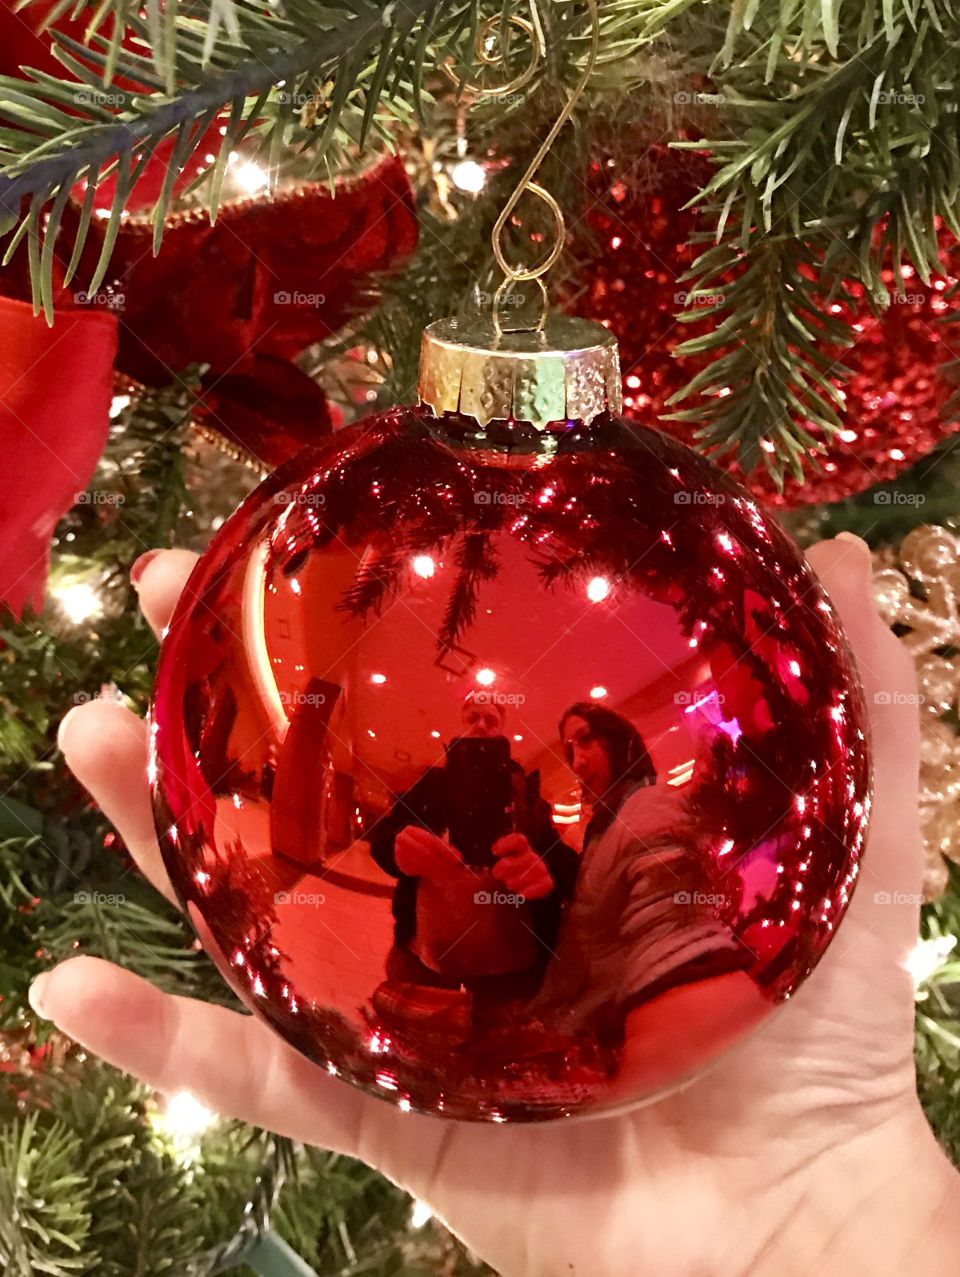 Incredible Reflections, reflecting, reflection,reflect, light, red, glass, ornament, distorted, round